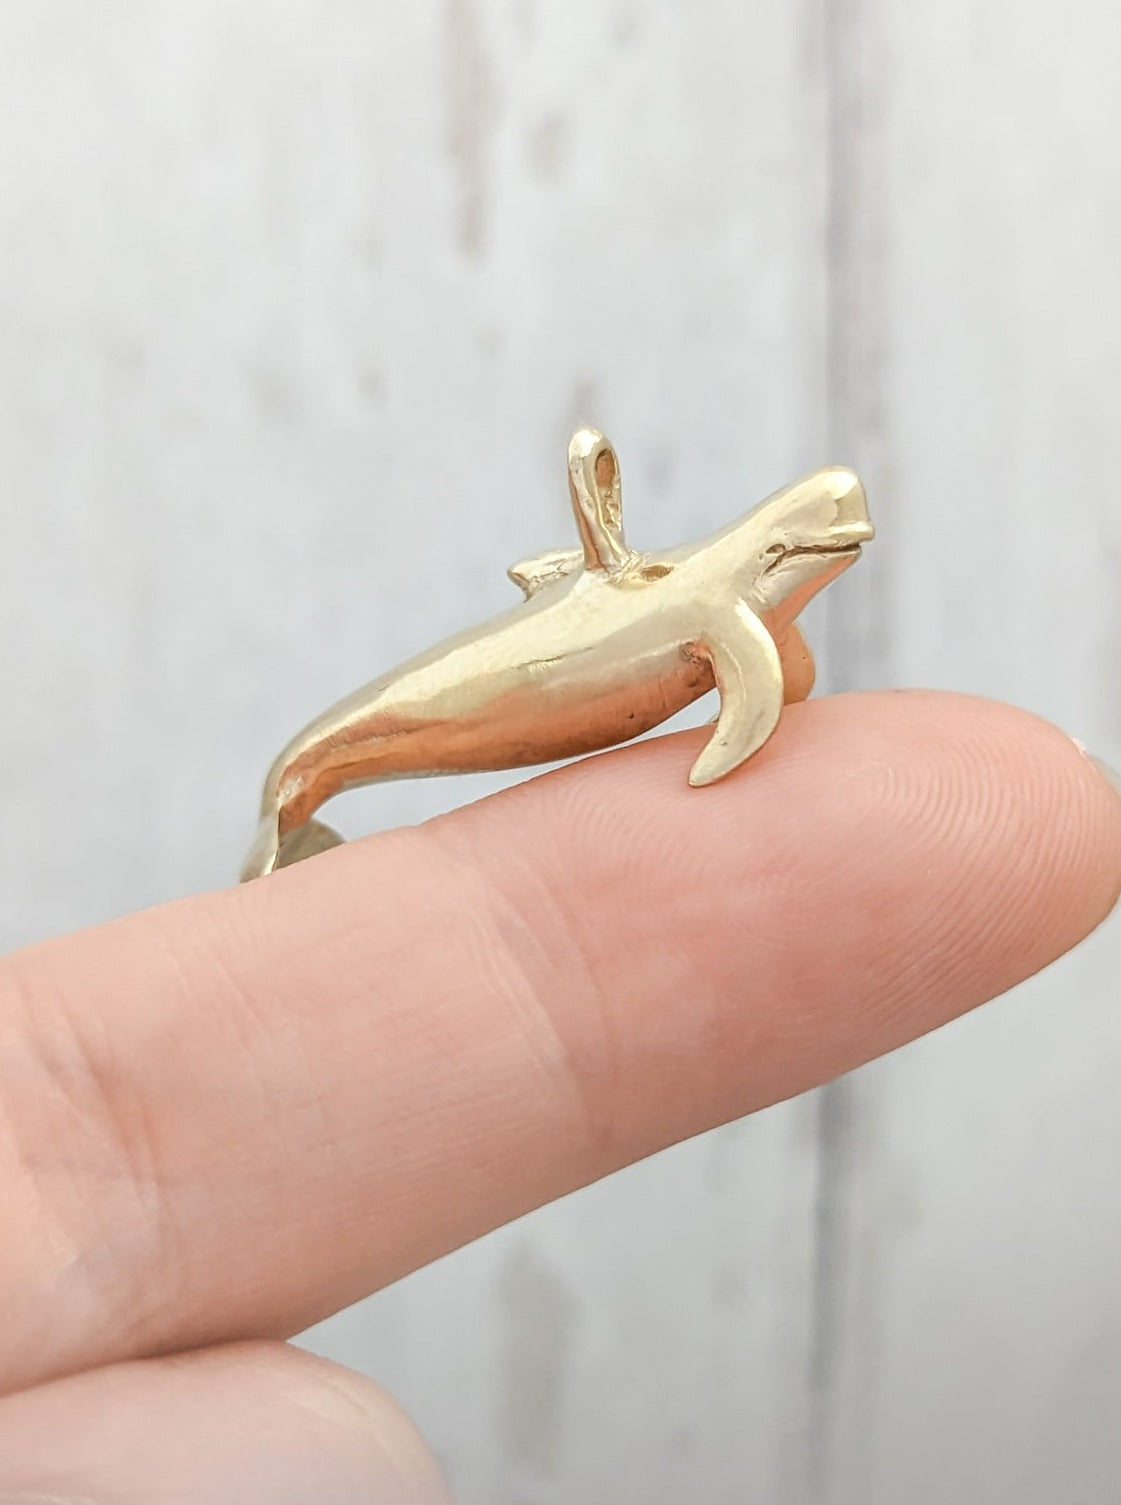 Pilot whale gold charm shown on finger for scale